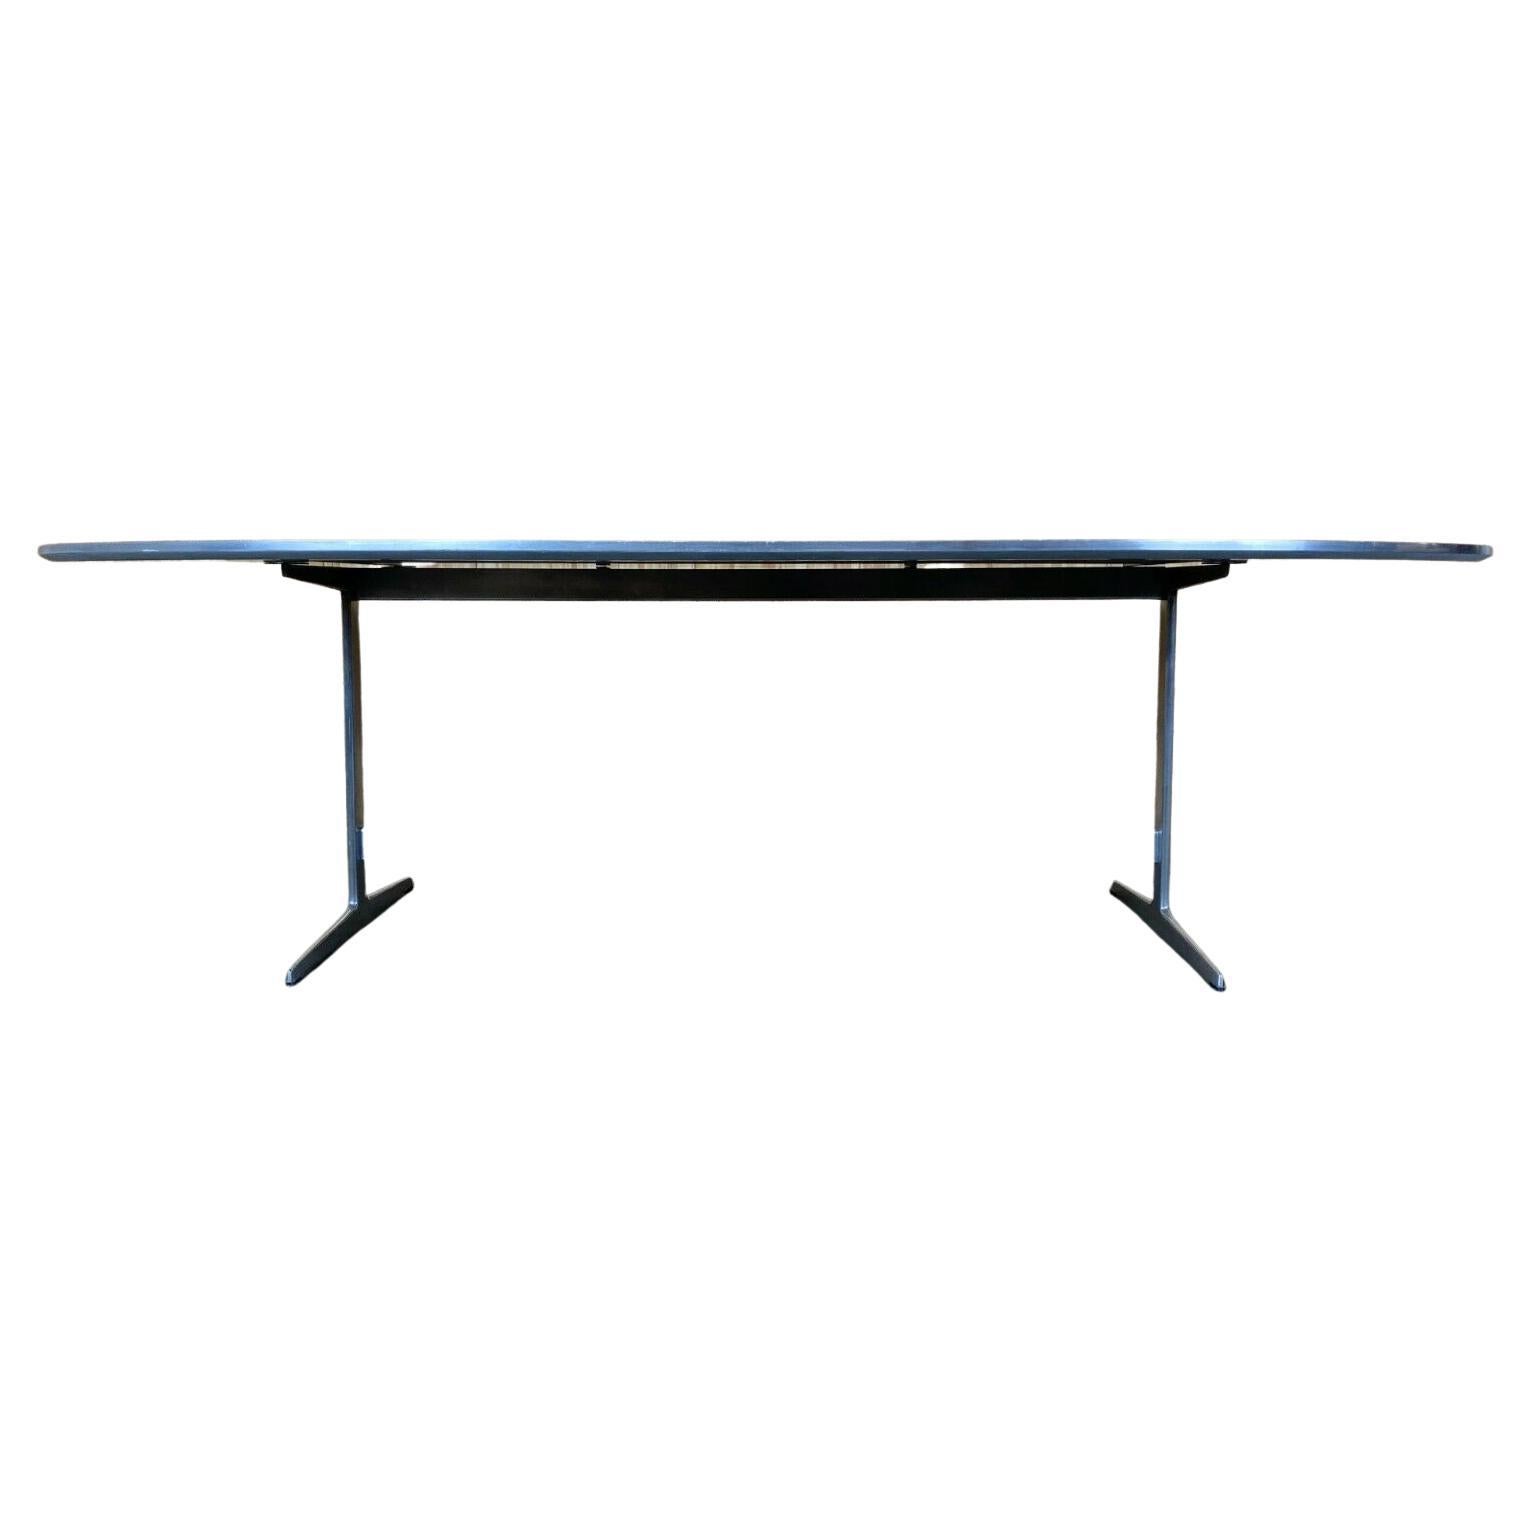 Danish modern dining table by Piet Hein & Bruno Mathsson for Fritz Hansen Design

Object: dining table

Manufacturer: Fritz Hansen

Condition: good

Age: around 2000

Dimensions:

240cm x 120cm x 70.5cm

Other notes:

The pictures